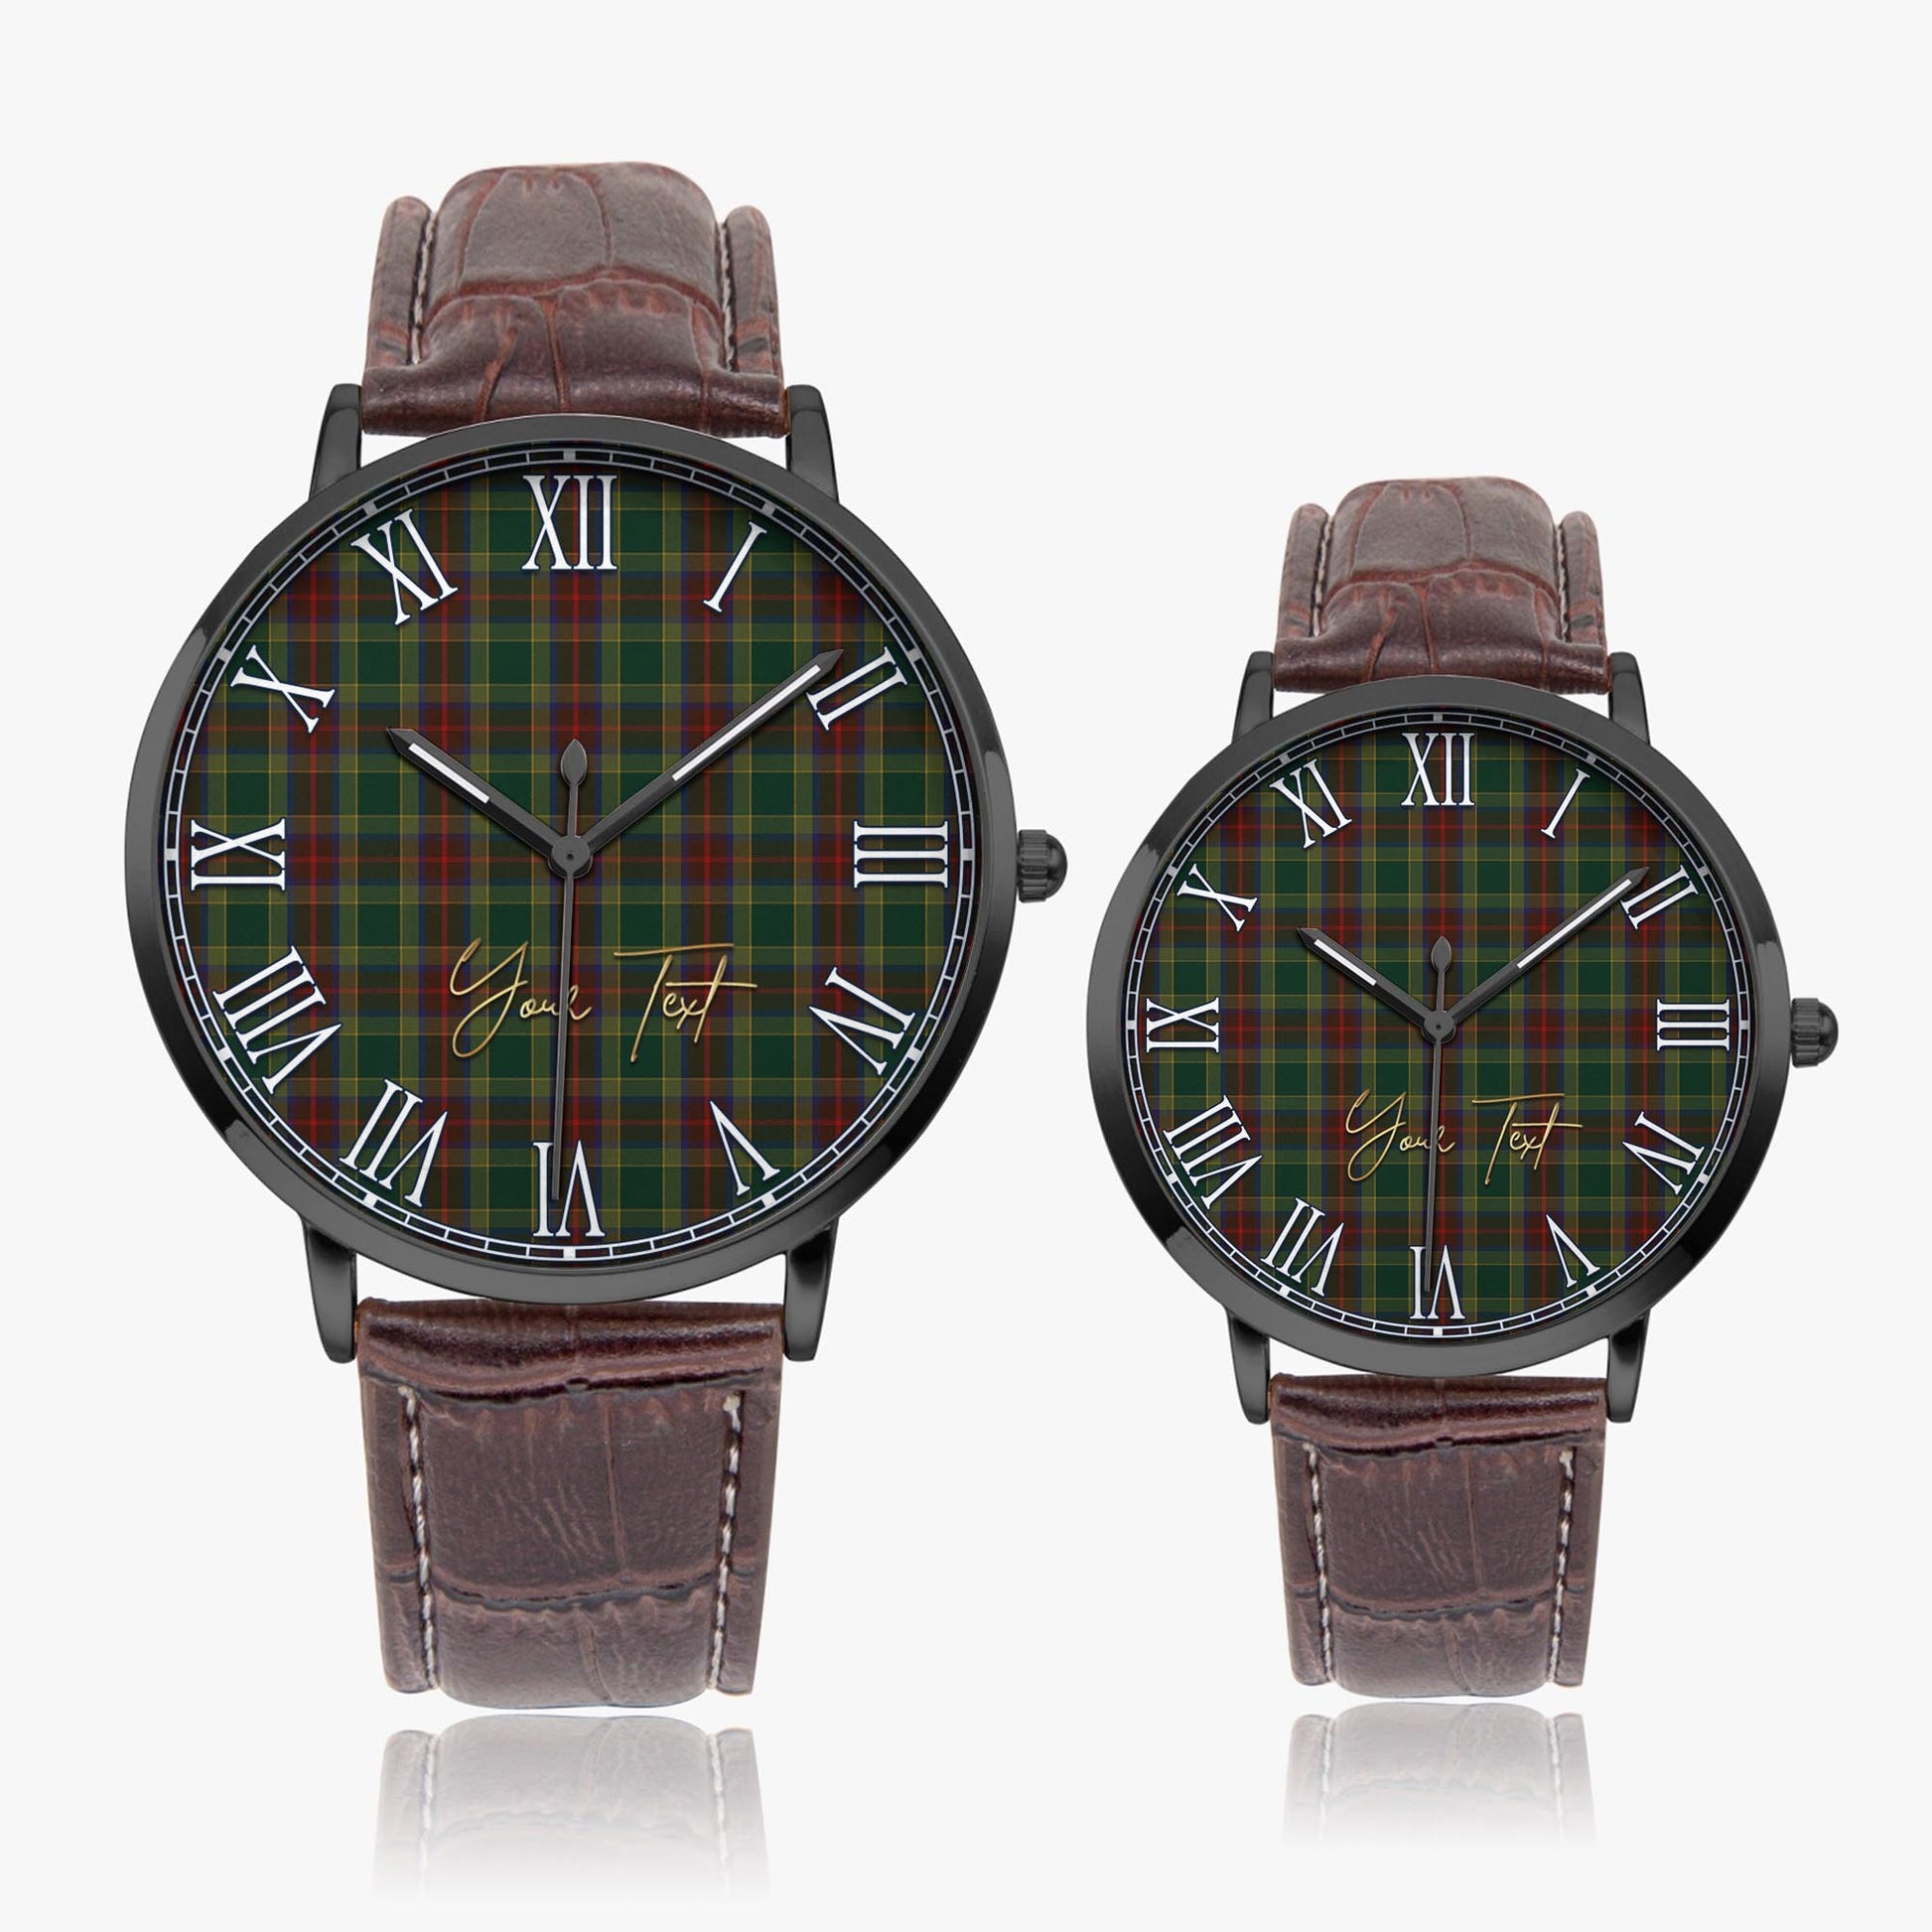 Waterford County Ireland Tartan Personalized Your Text Leather Trap Quartz Watch Ultra Thin Black Case With Brown Leather Strap - Tartanvibesclothing Shop